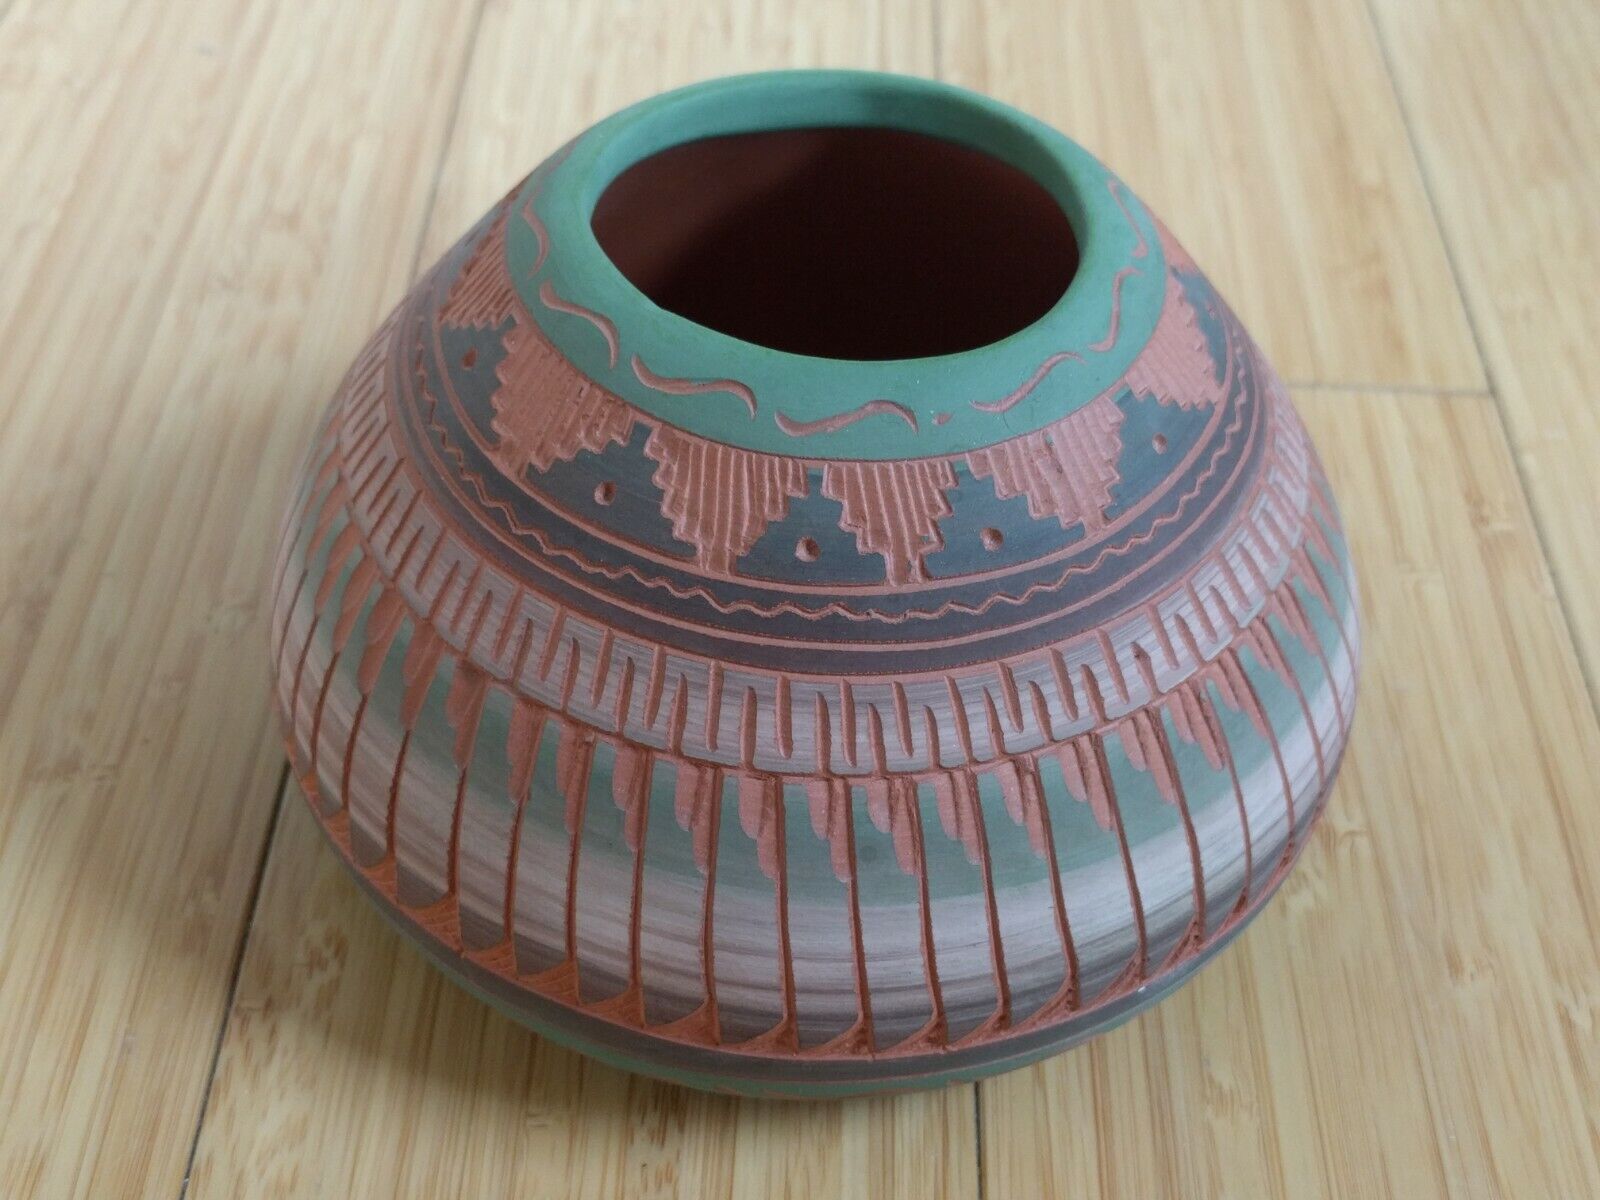 Handcrafted native American motive pottery sculpted terracotta vase